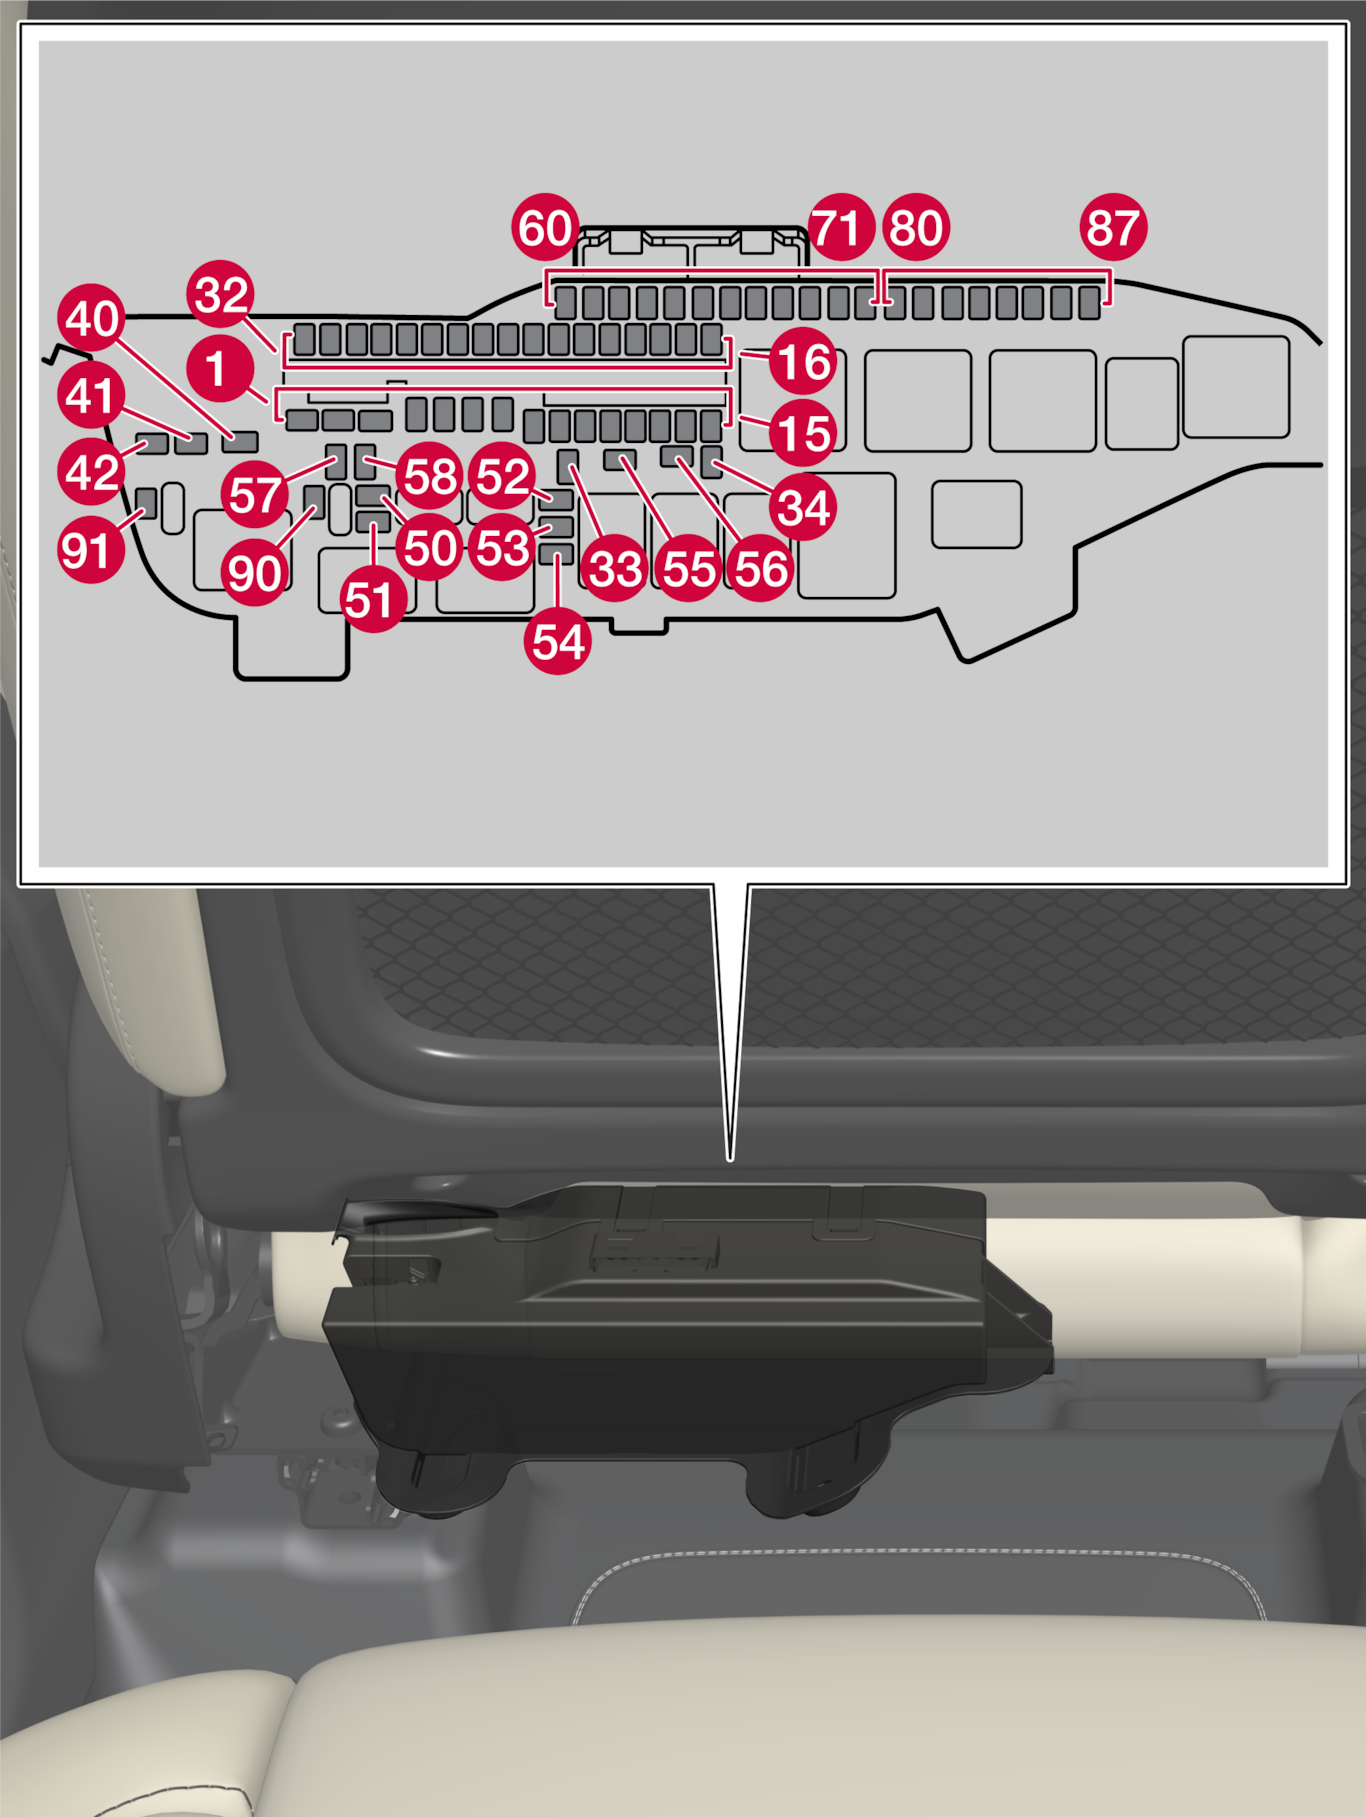 P6-XC40-22w22-Central Junction Box, Fuses under the left-hand front seat